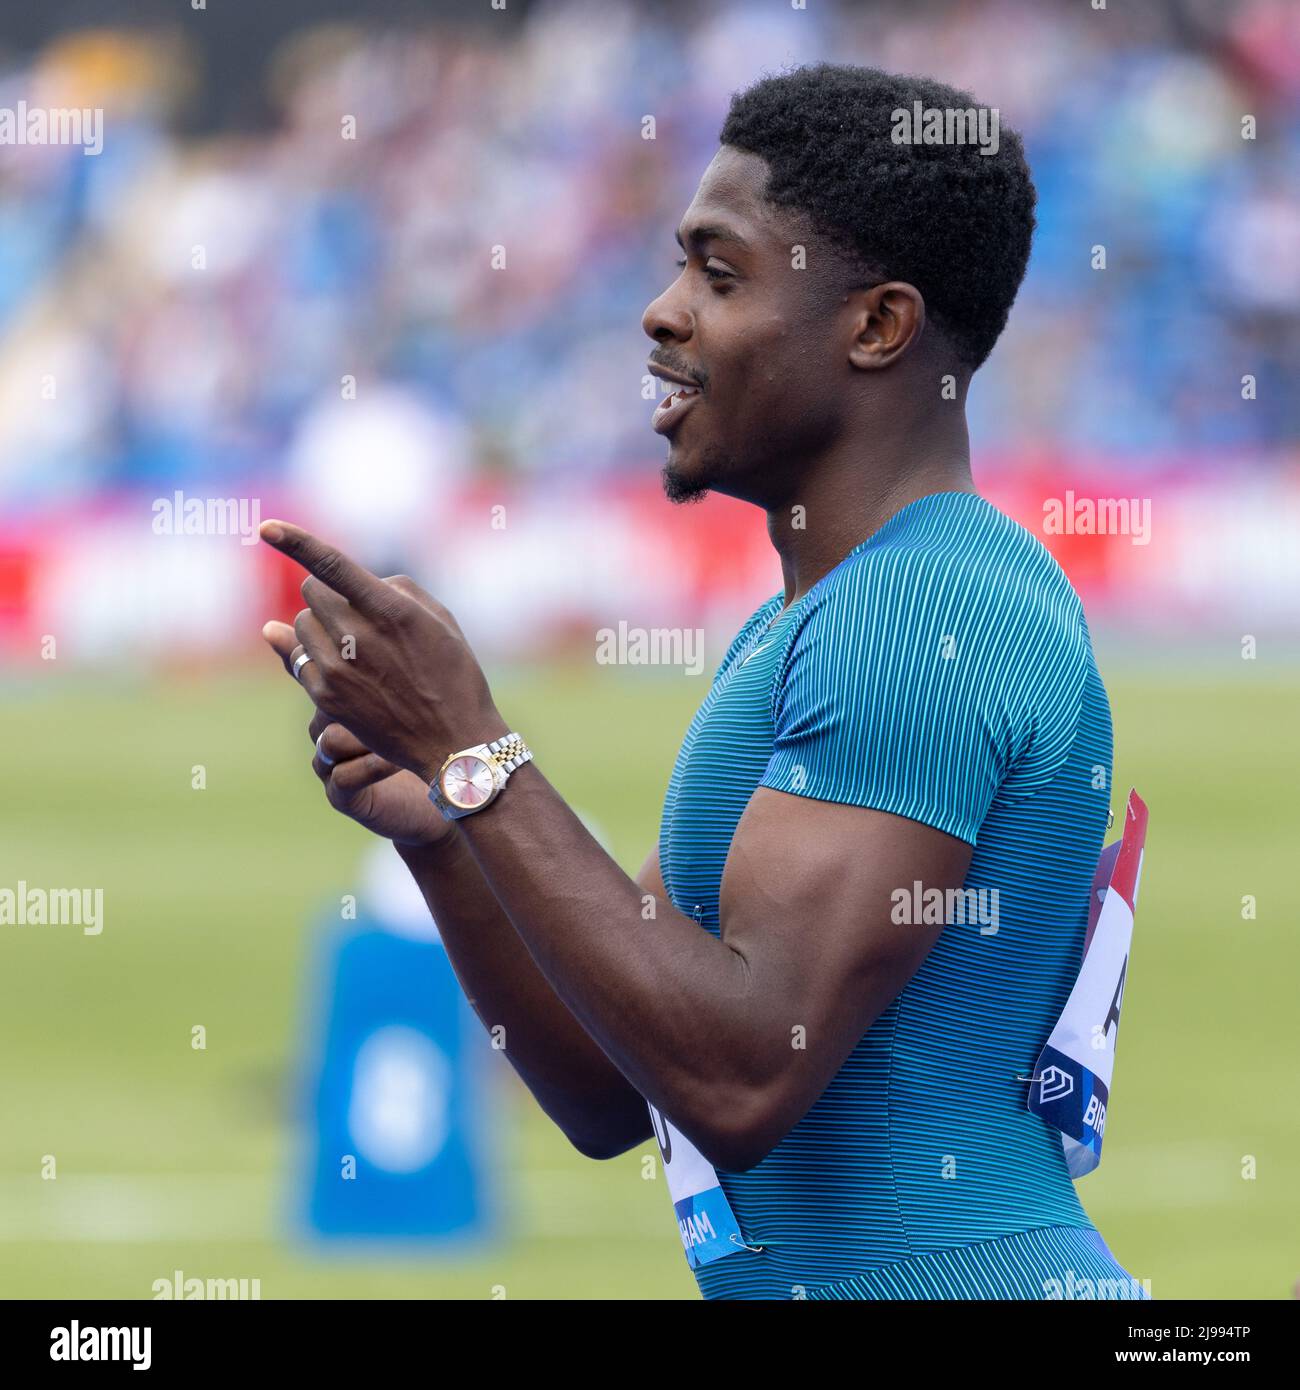 Birmingham, England. 21st May, 2022. Jeremiah Azu (GBR) during the Mens 100m the Müller Diamond League athletics event at the Alexander Stadium in Birmingham, England. The Diamond League is an annual series of elite track and field athletic competitions comprising fourteen of the best invitational athletics meetings. Credit: Sporting Pics / Alamy Live News Stock Photo